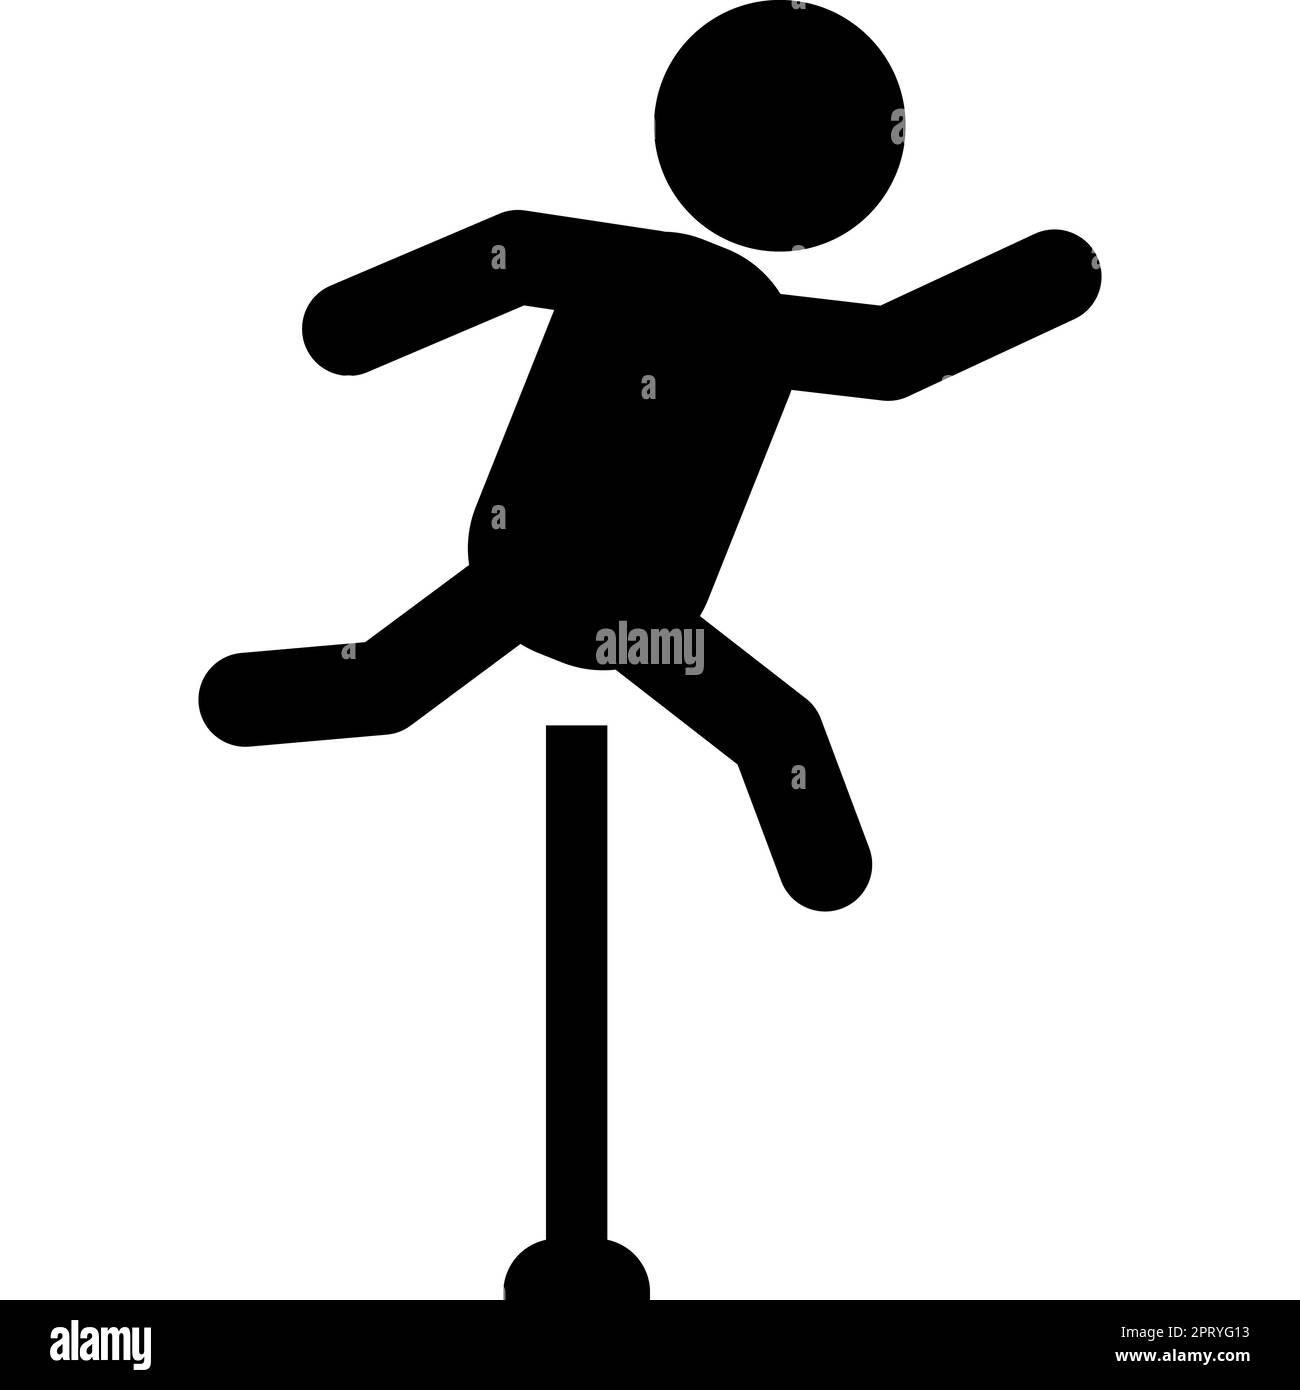 Hurdler icon on white background. Man figure jumping over obstacles sign. Hurdle Race symbol. flat style. Stock Photo